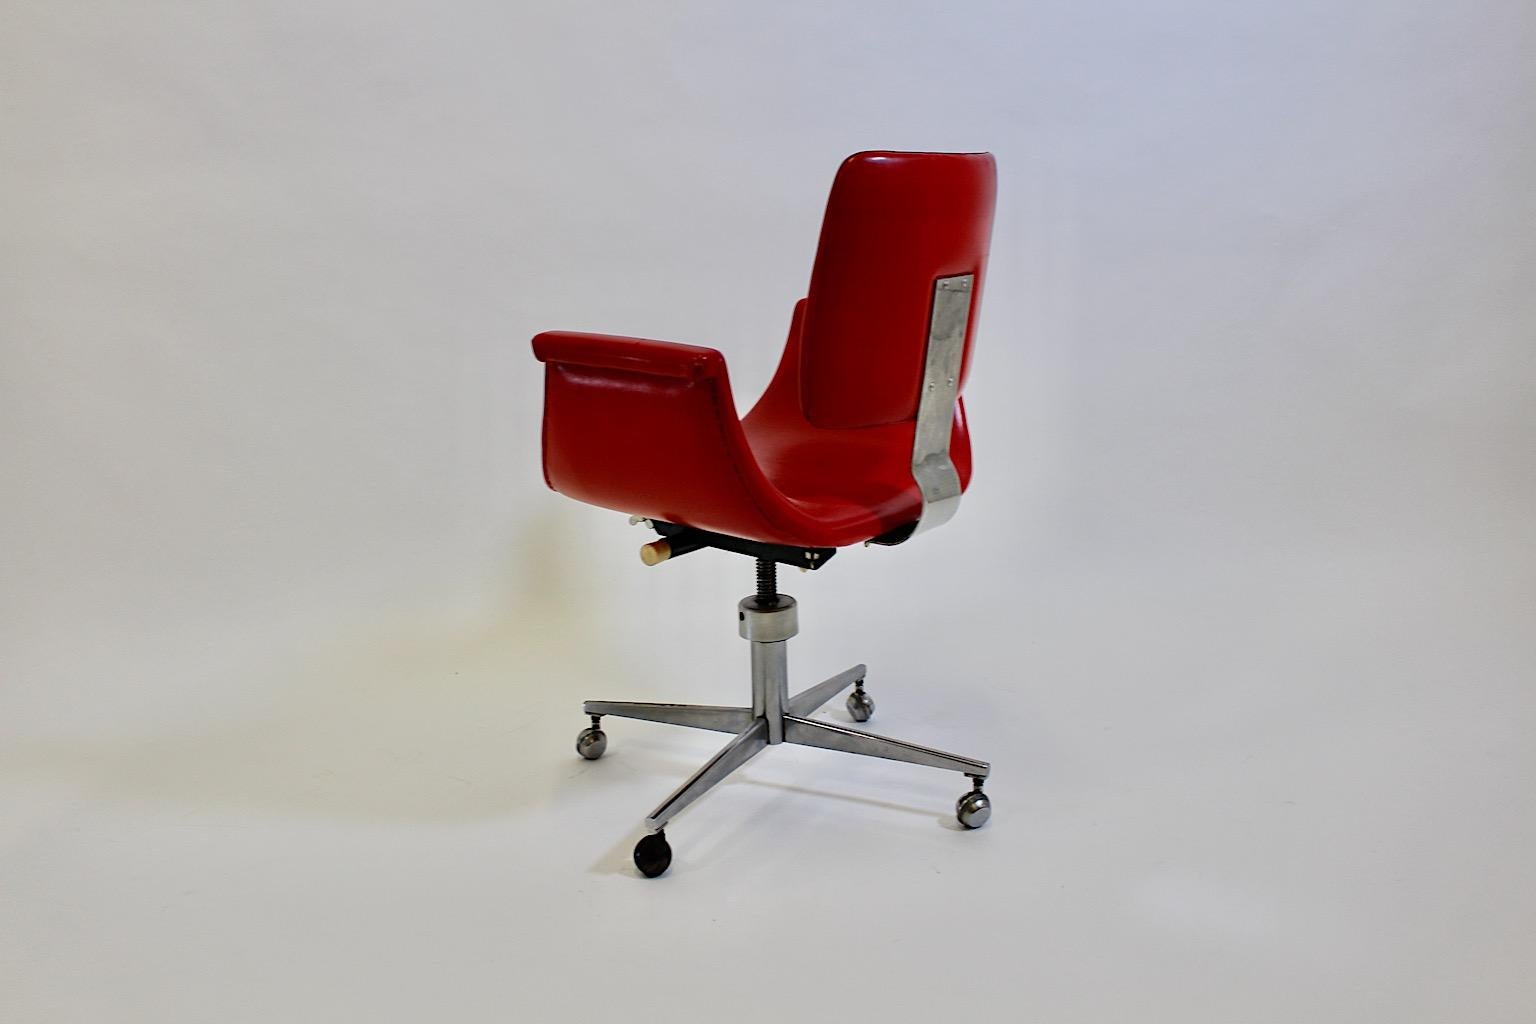 Mid-20th Century Space Age Vintage Red Faux Leather Chrome Metal Office Chair Desk Chair 1960s For Sale